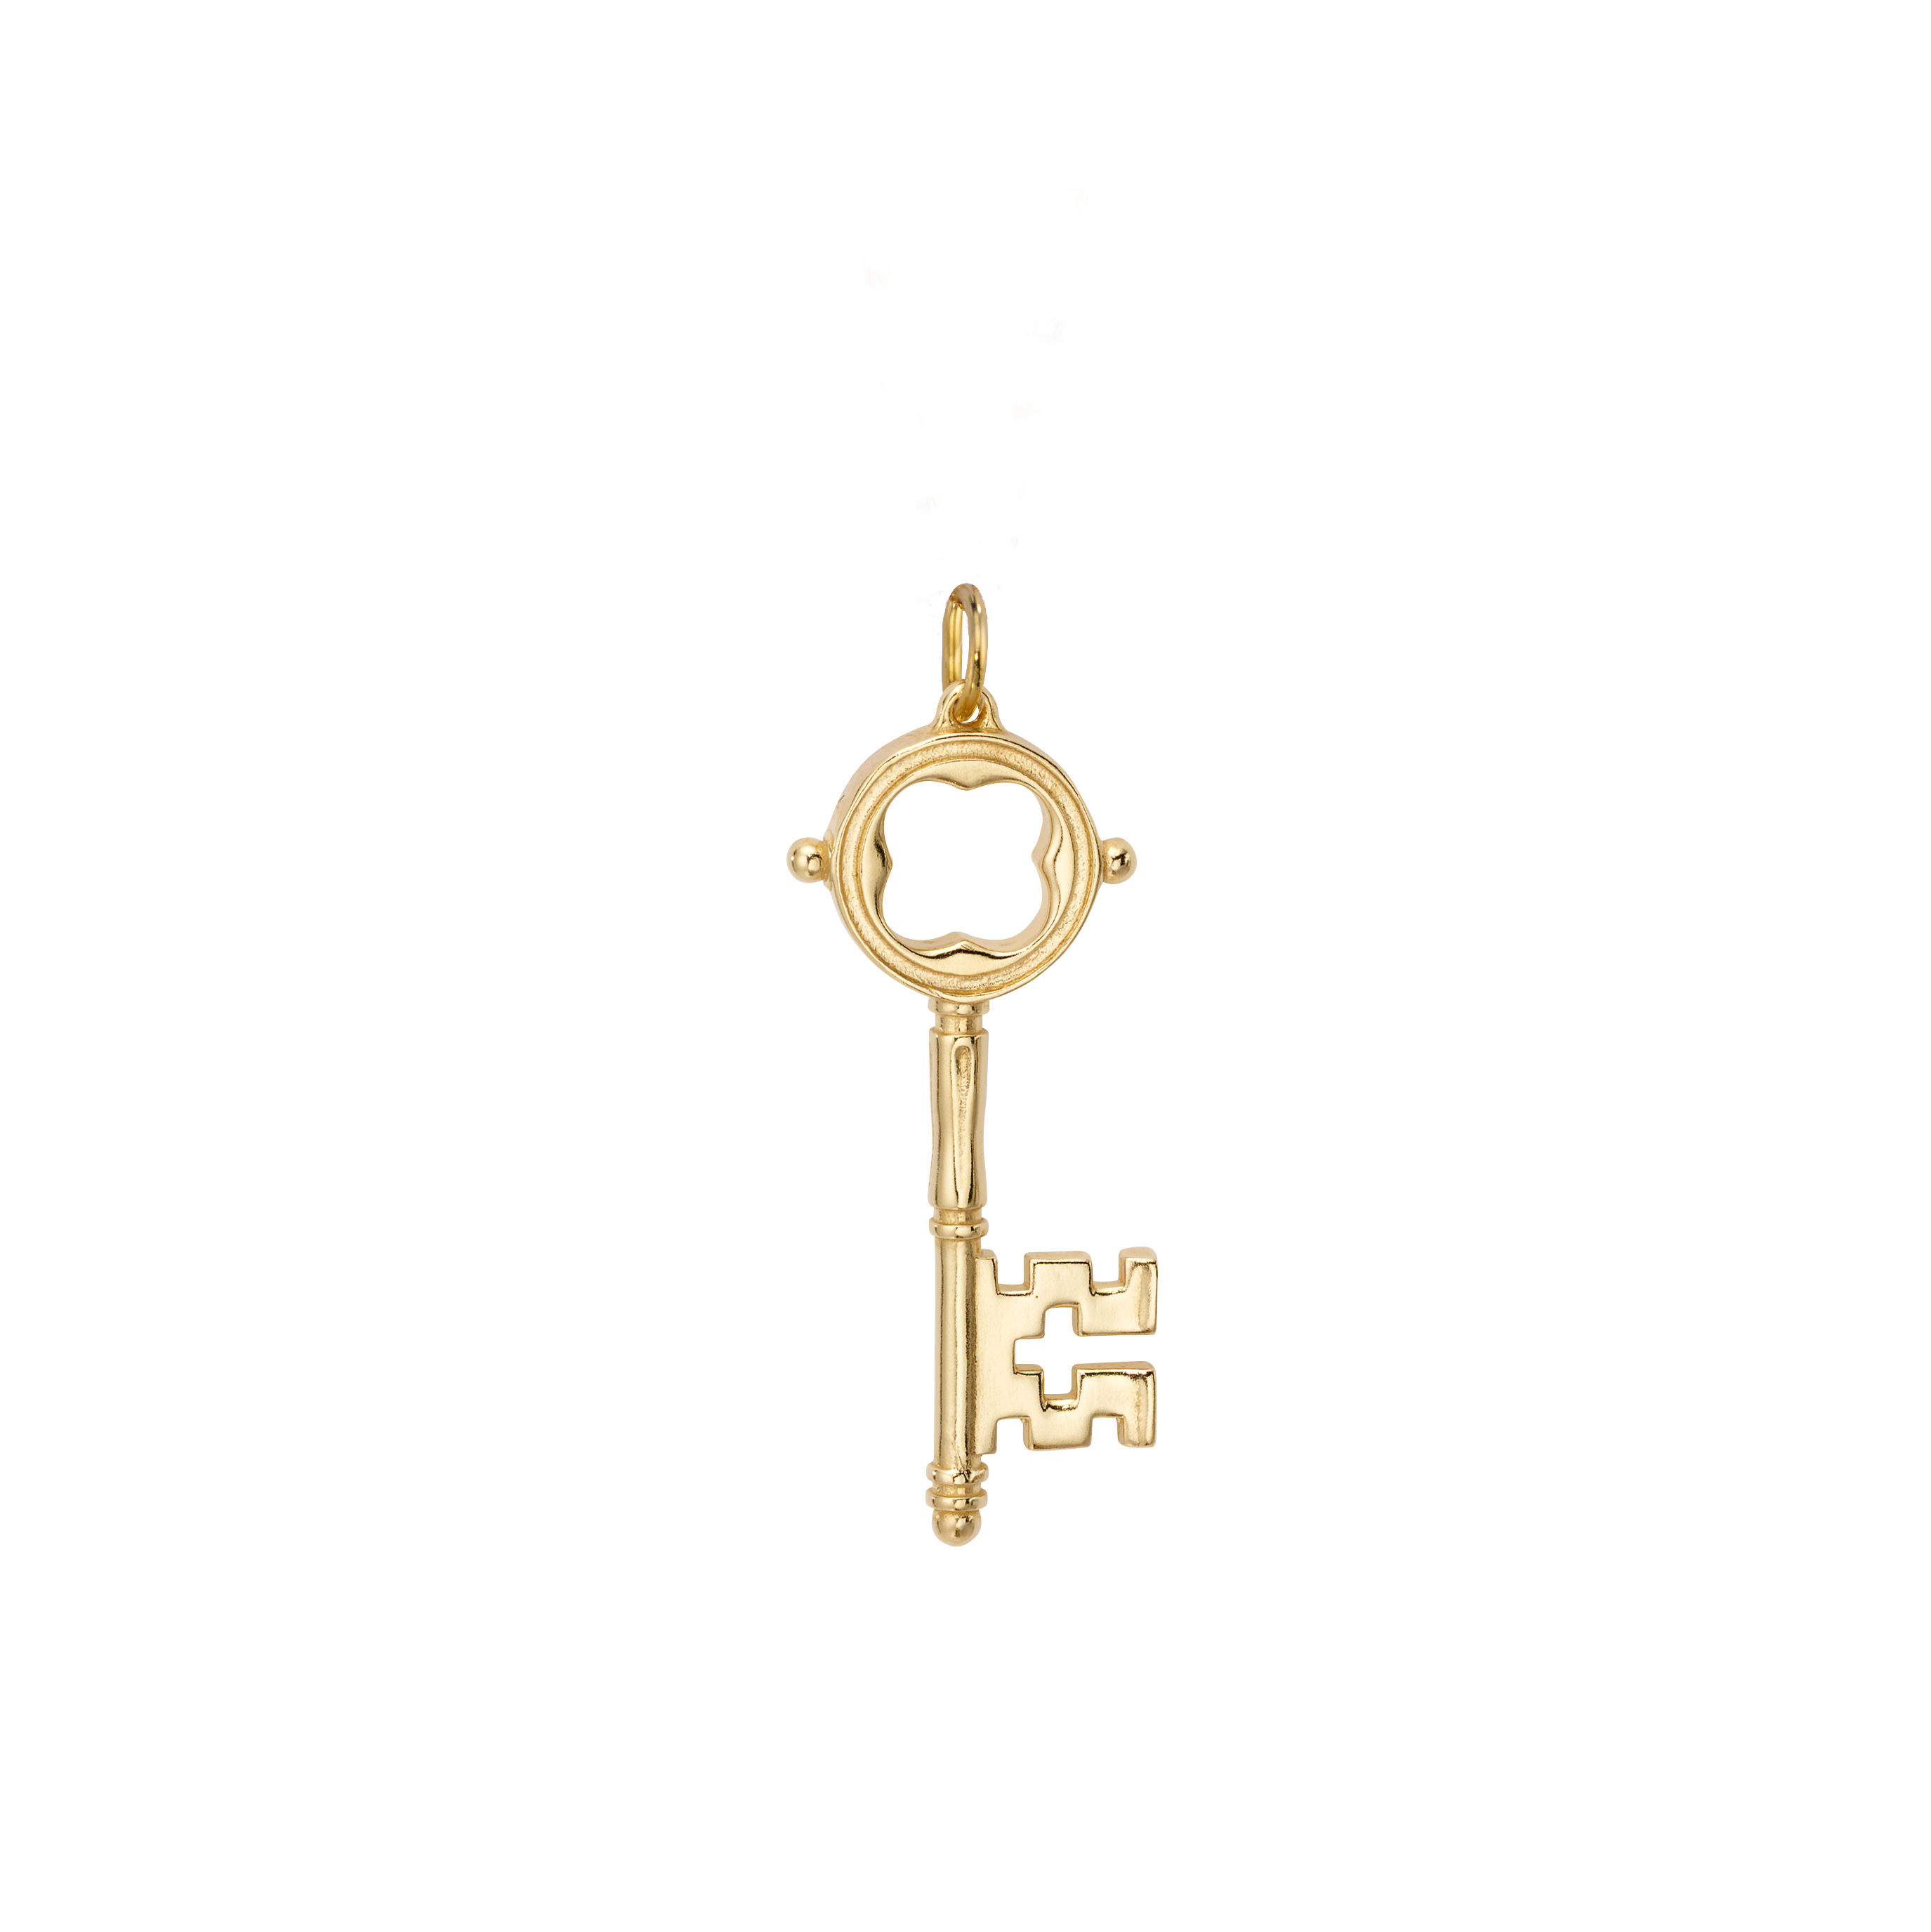 Key to Heaven Pendant Charm  Fine jewelry solid silver gold-finish  necklaces bracelets earrings